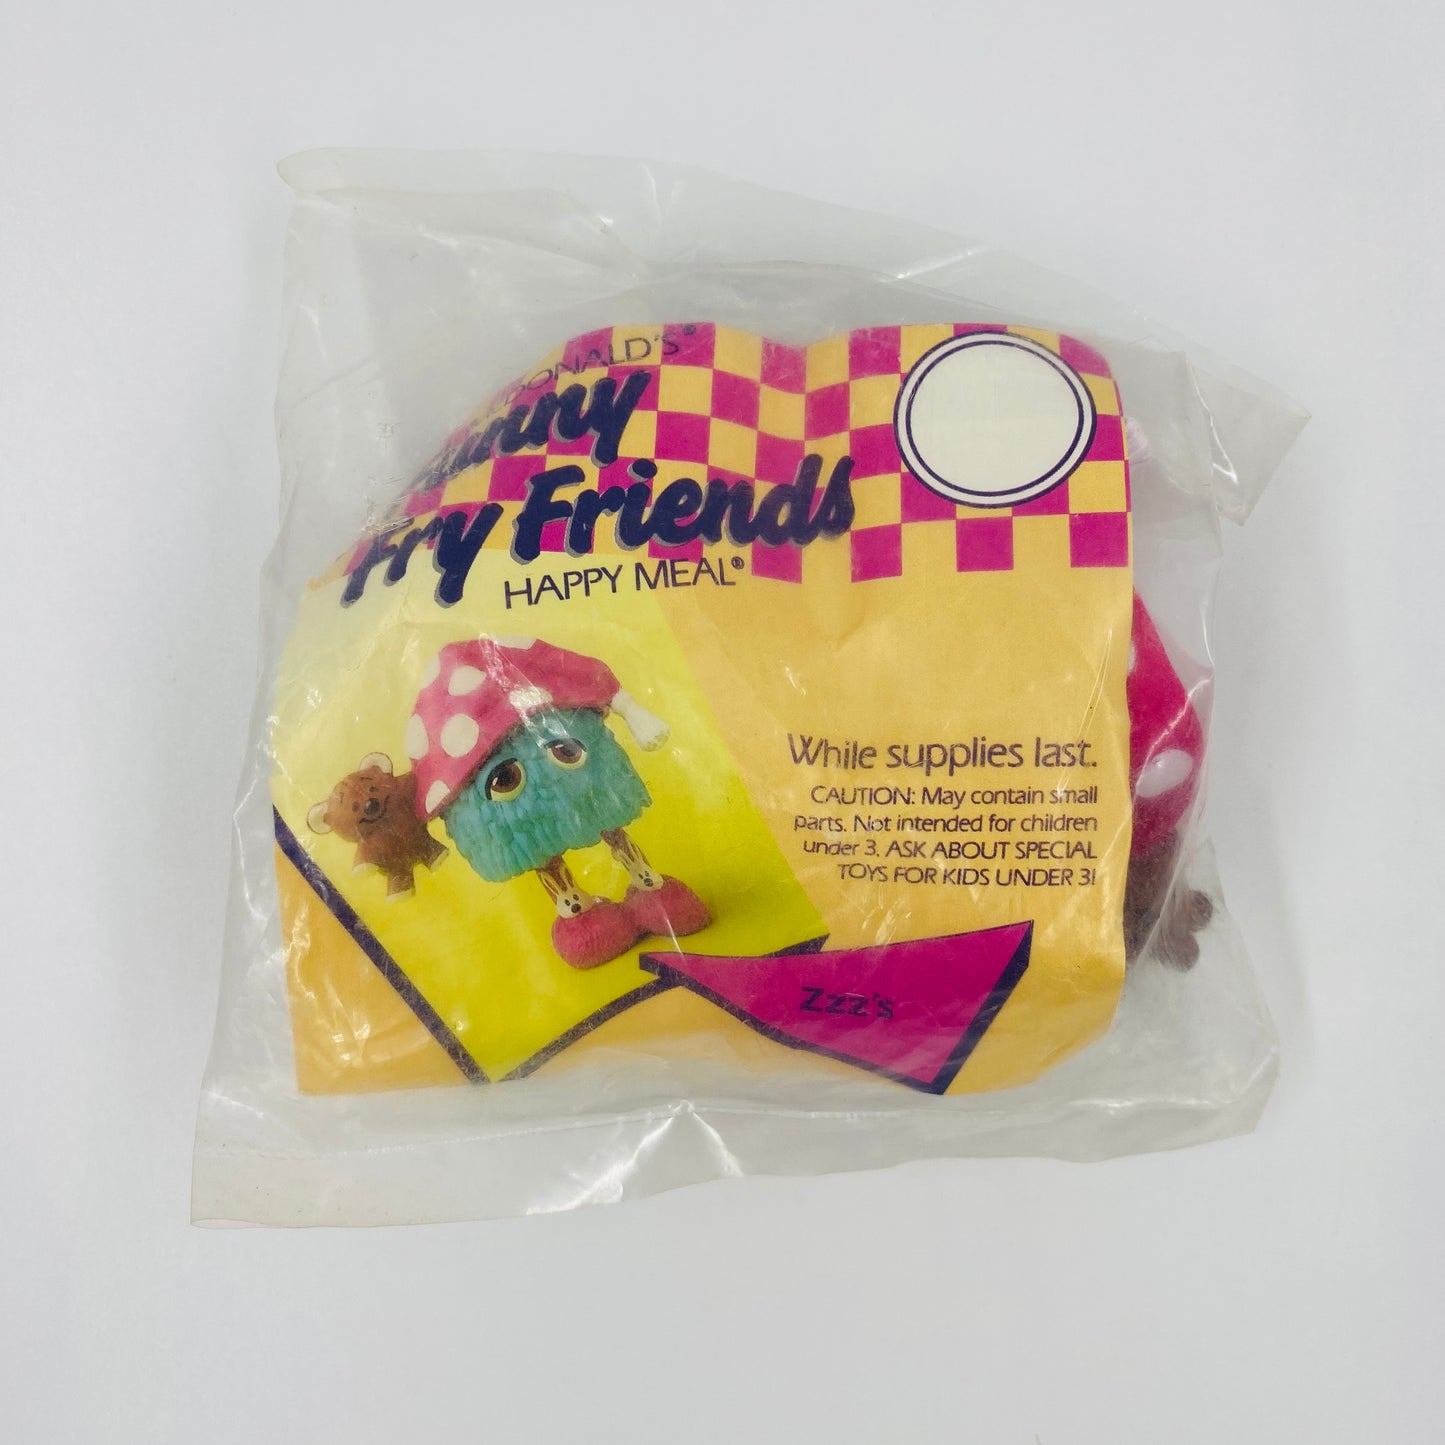 McDonald's Funny Fry Friends Zzz's McDonald's Happy Meal toy (1989) bagged